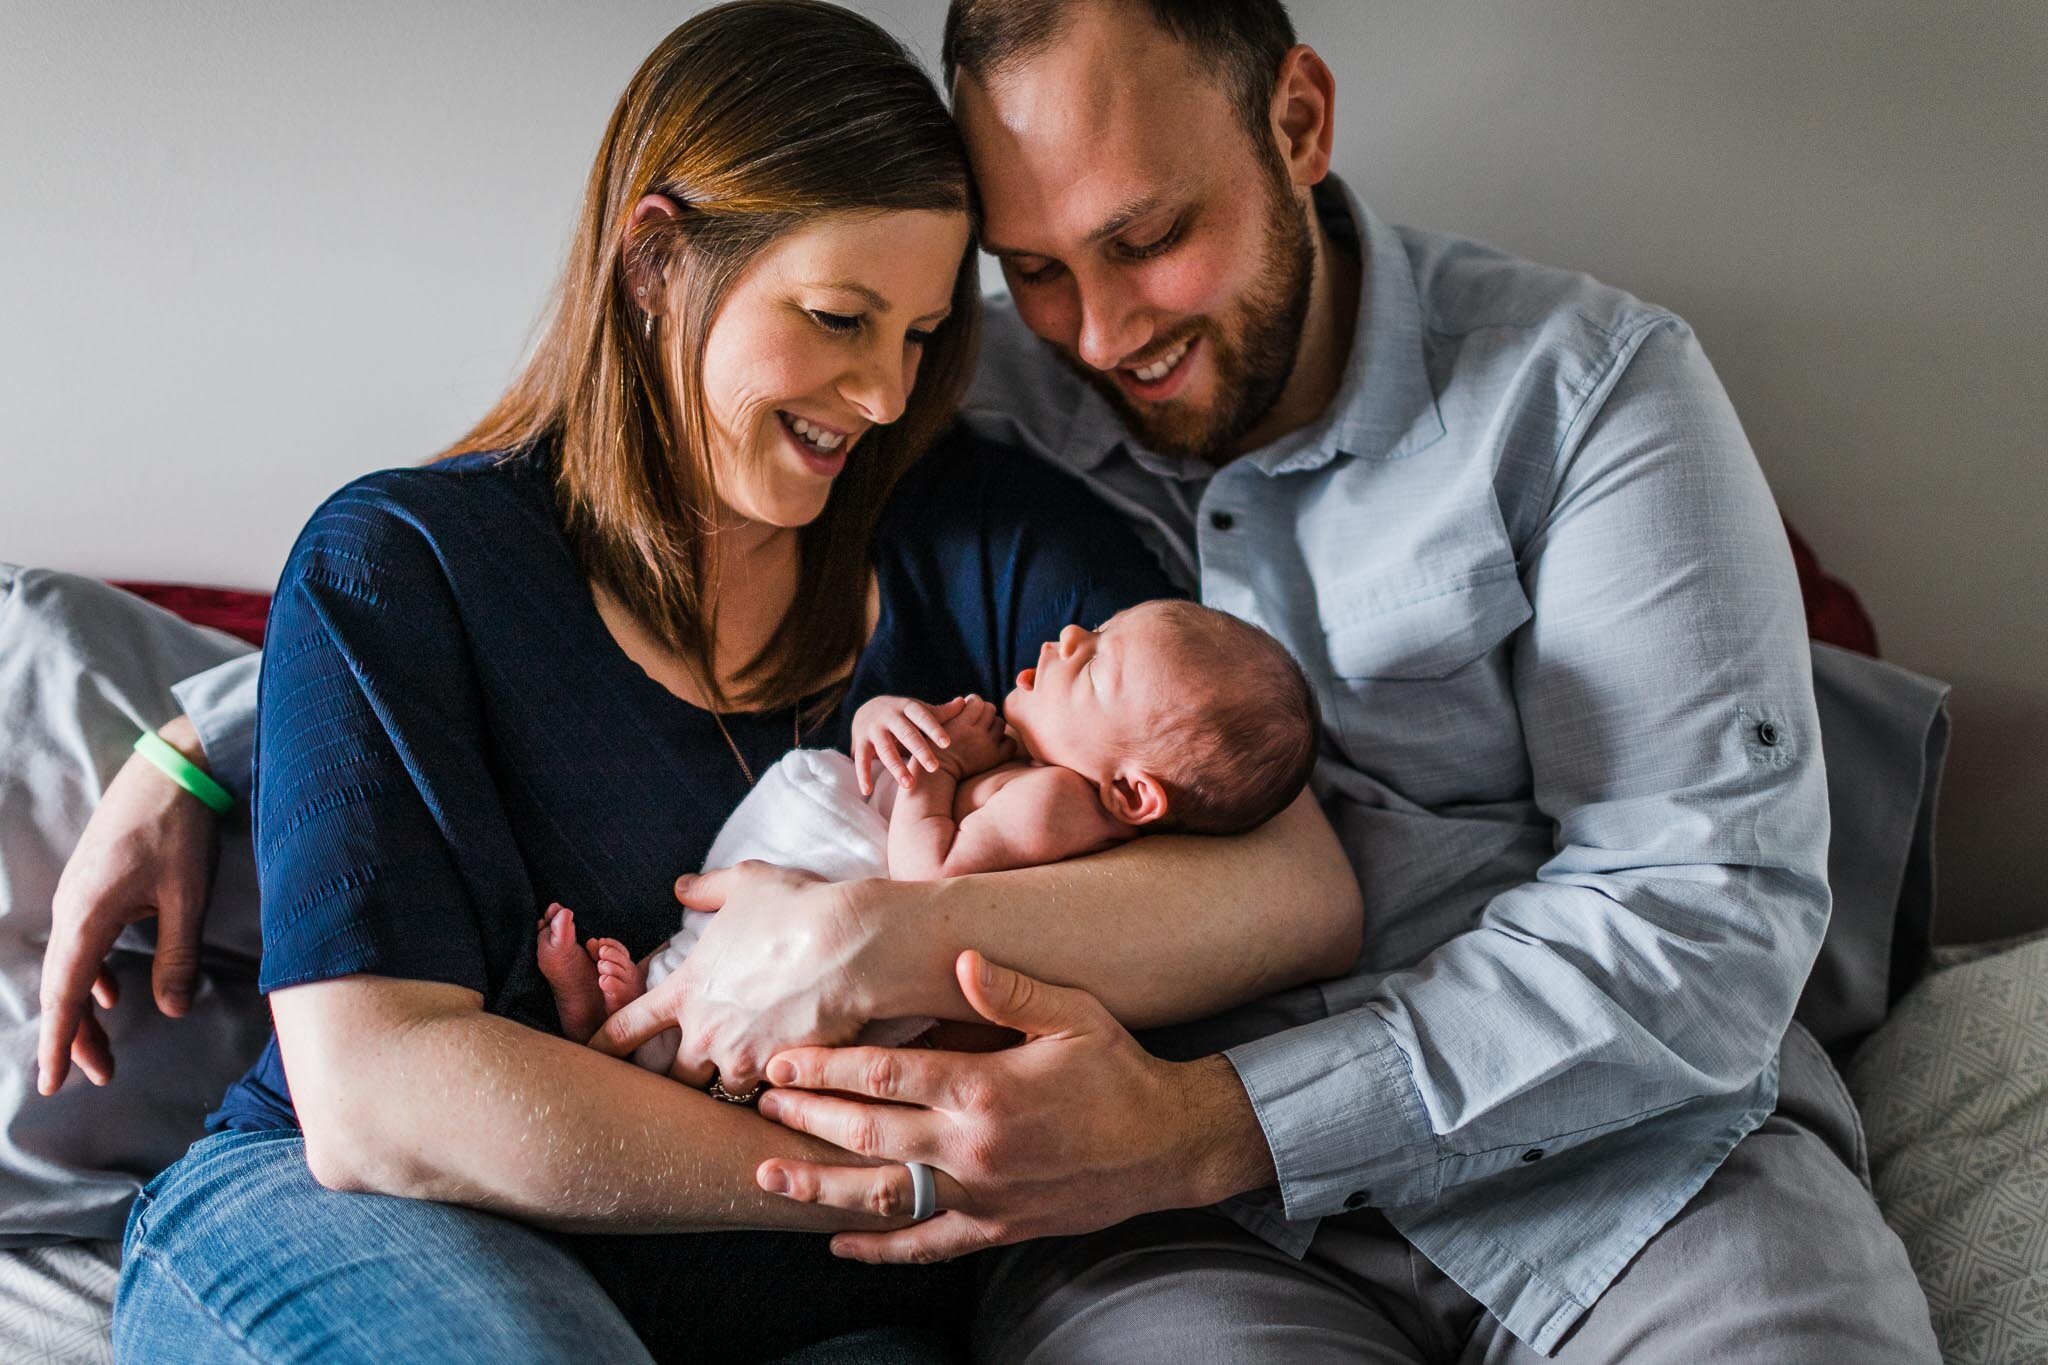 Raleigh Newborn Photographer | By G. Lin Photography | Parents holding newborn baby on bed